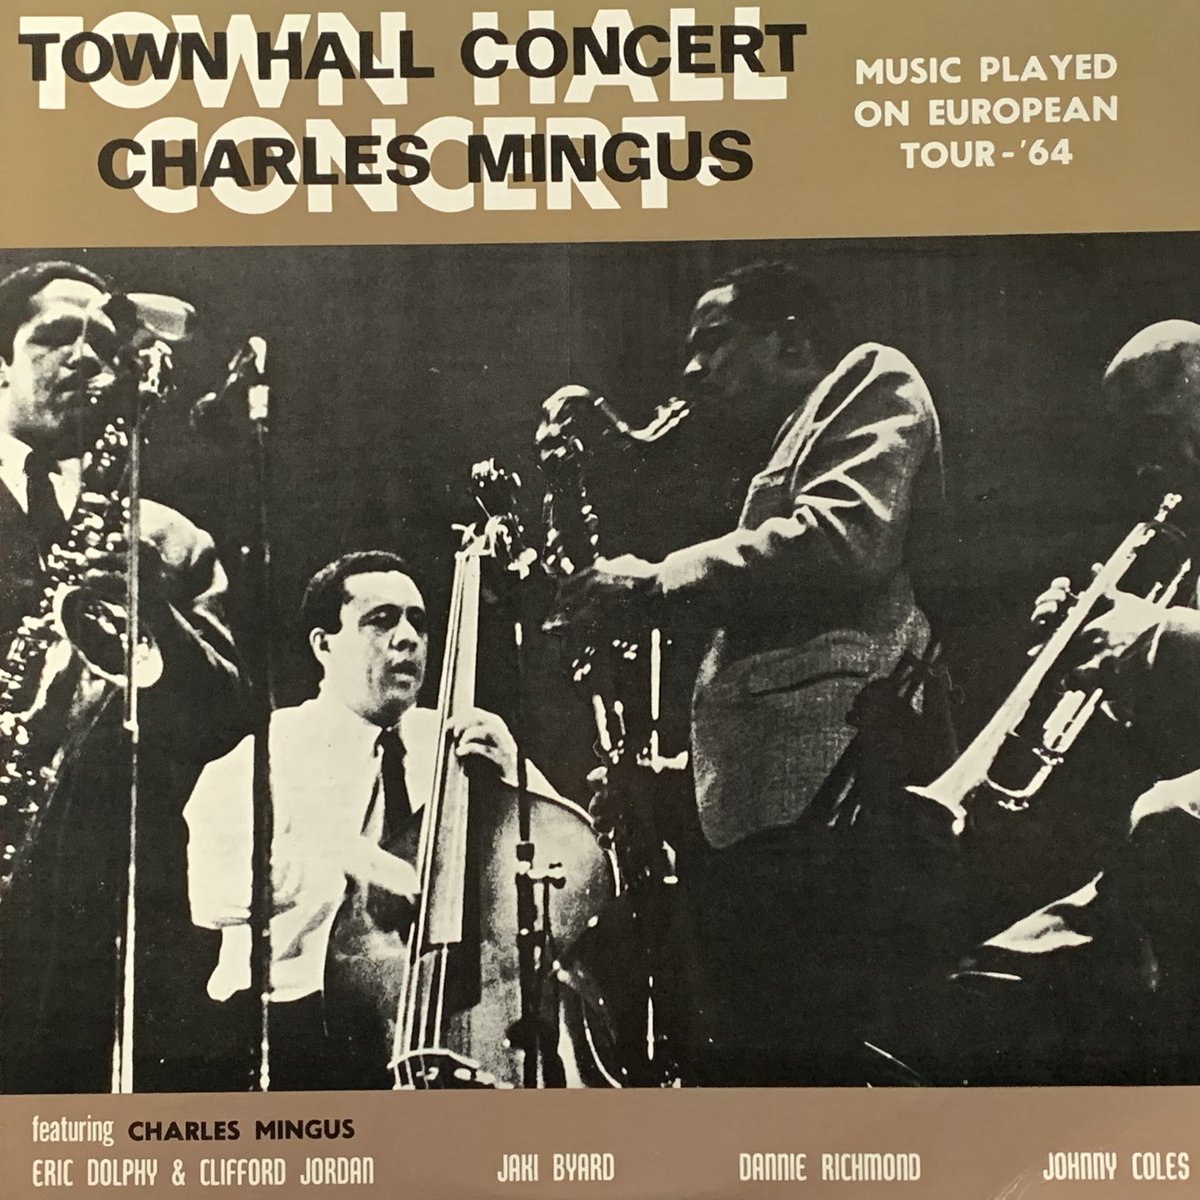 TOWN HALL CONCERT CHALES MINGUS Recorded 1964